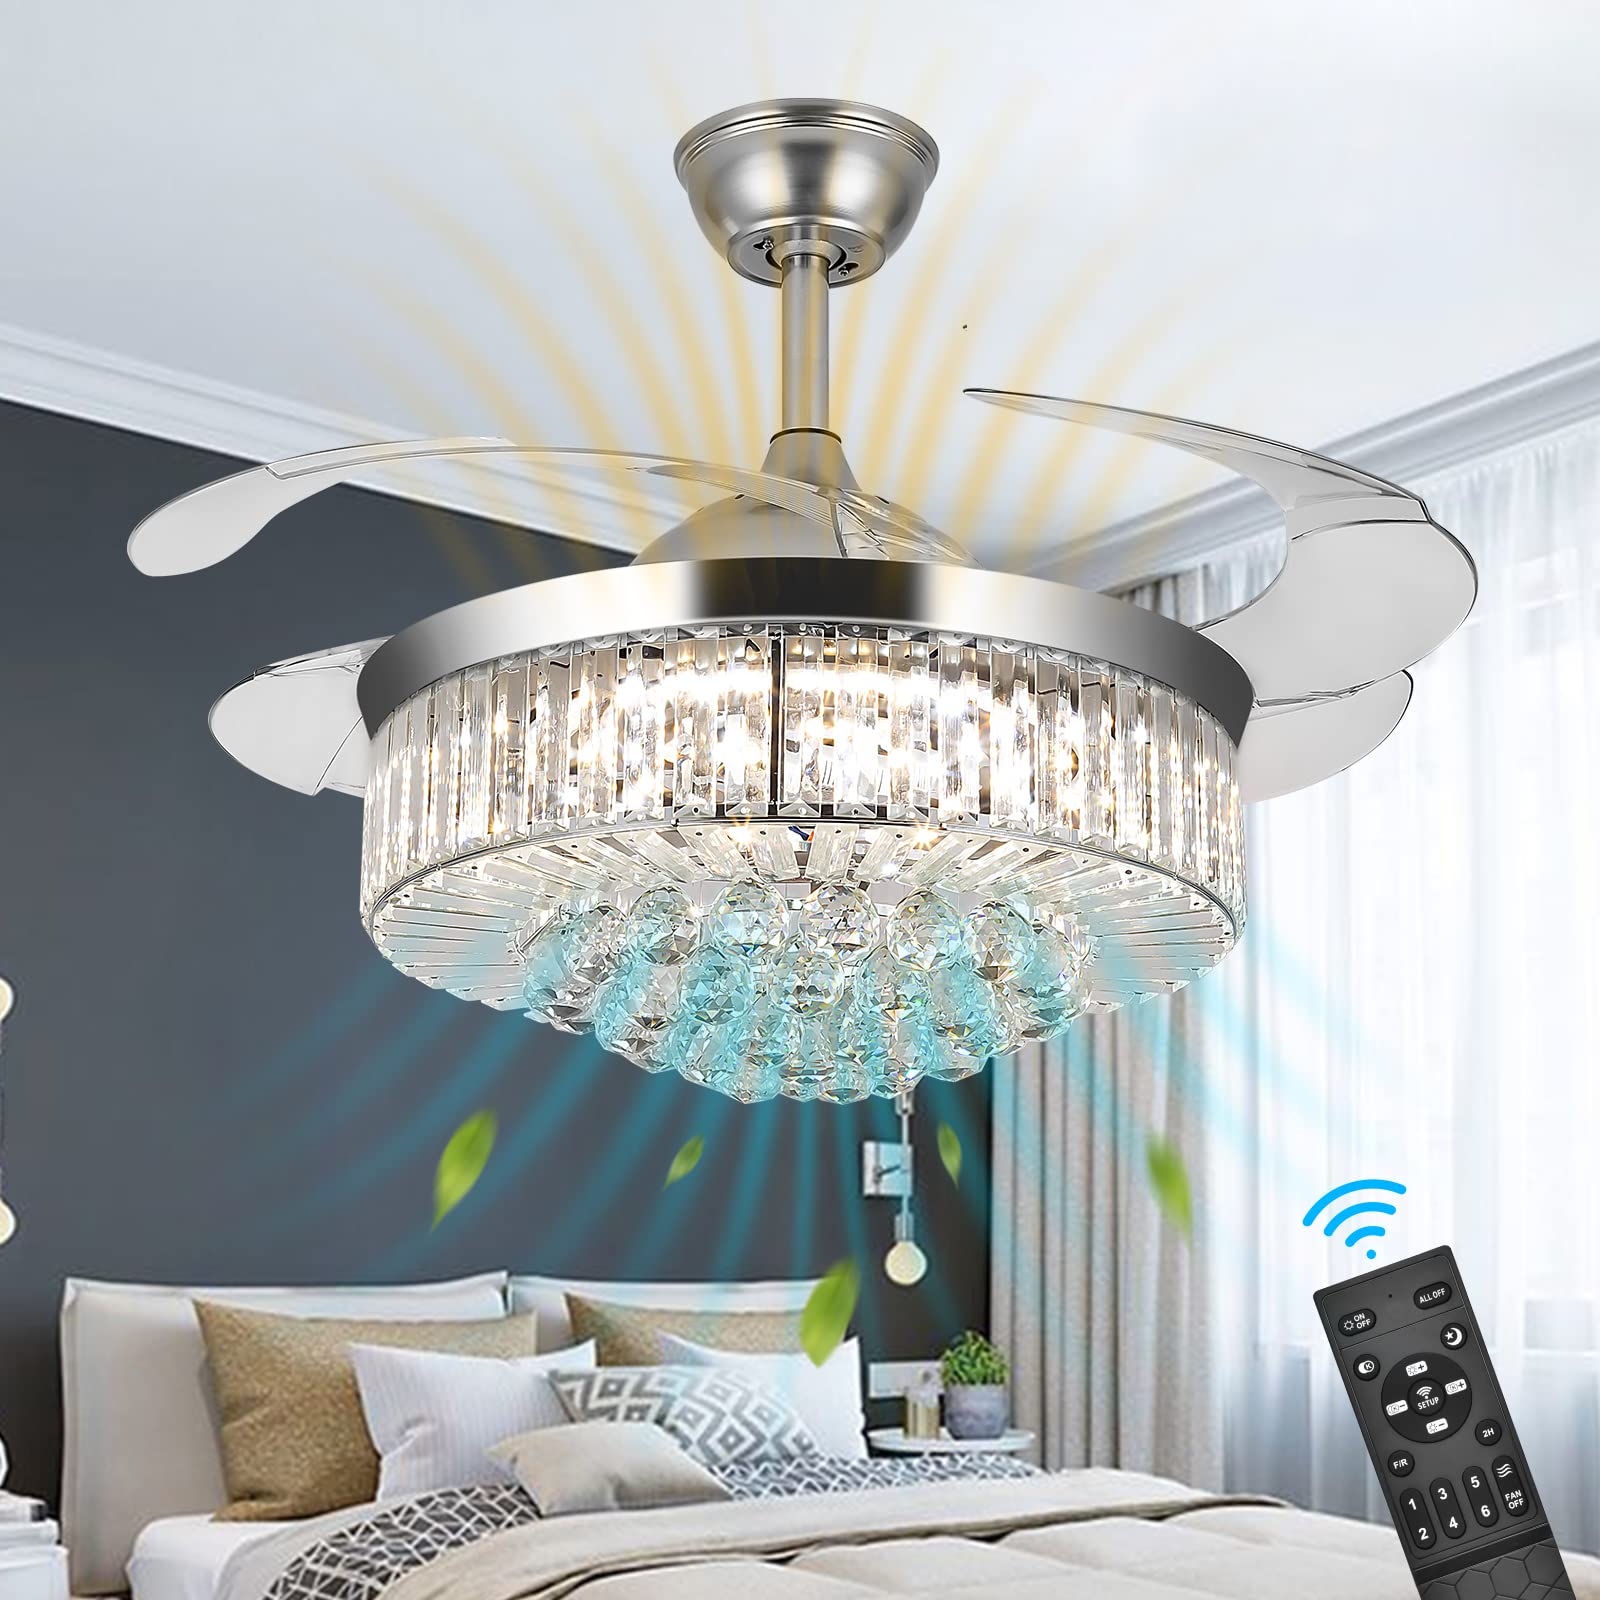 wuyule 42 Inches Crystal Ceiling Fan Silver Crystal Ceiling Fan Chandelier with Remote 3 Speeds 3 Colors Changes Lighting Fixture, 4 Blades Retractable Fans for Bedroom Living Room Dining Room